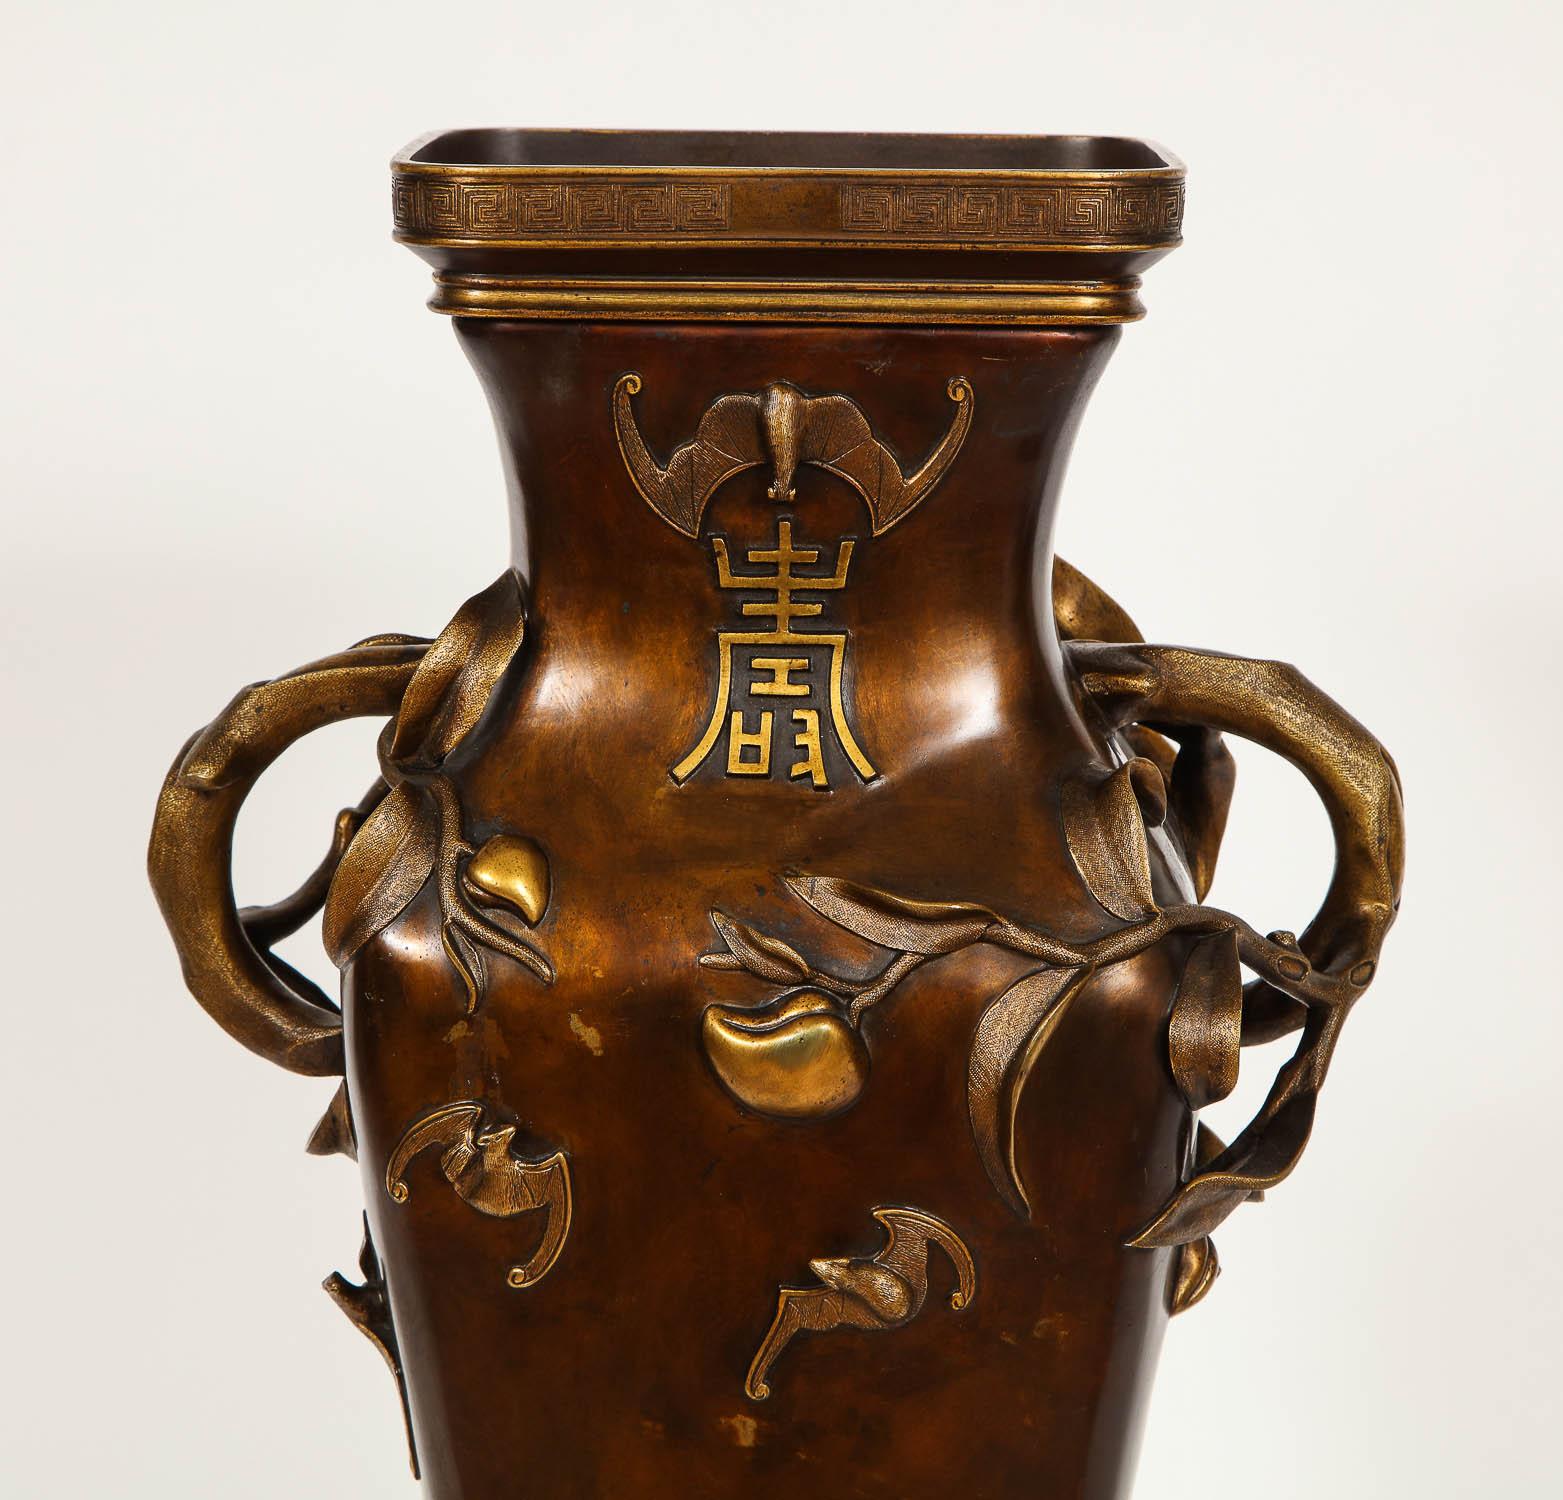 Gilt Antique French Bronze Orientalist Style Vase; E. Lievre for the Chinese Market